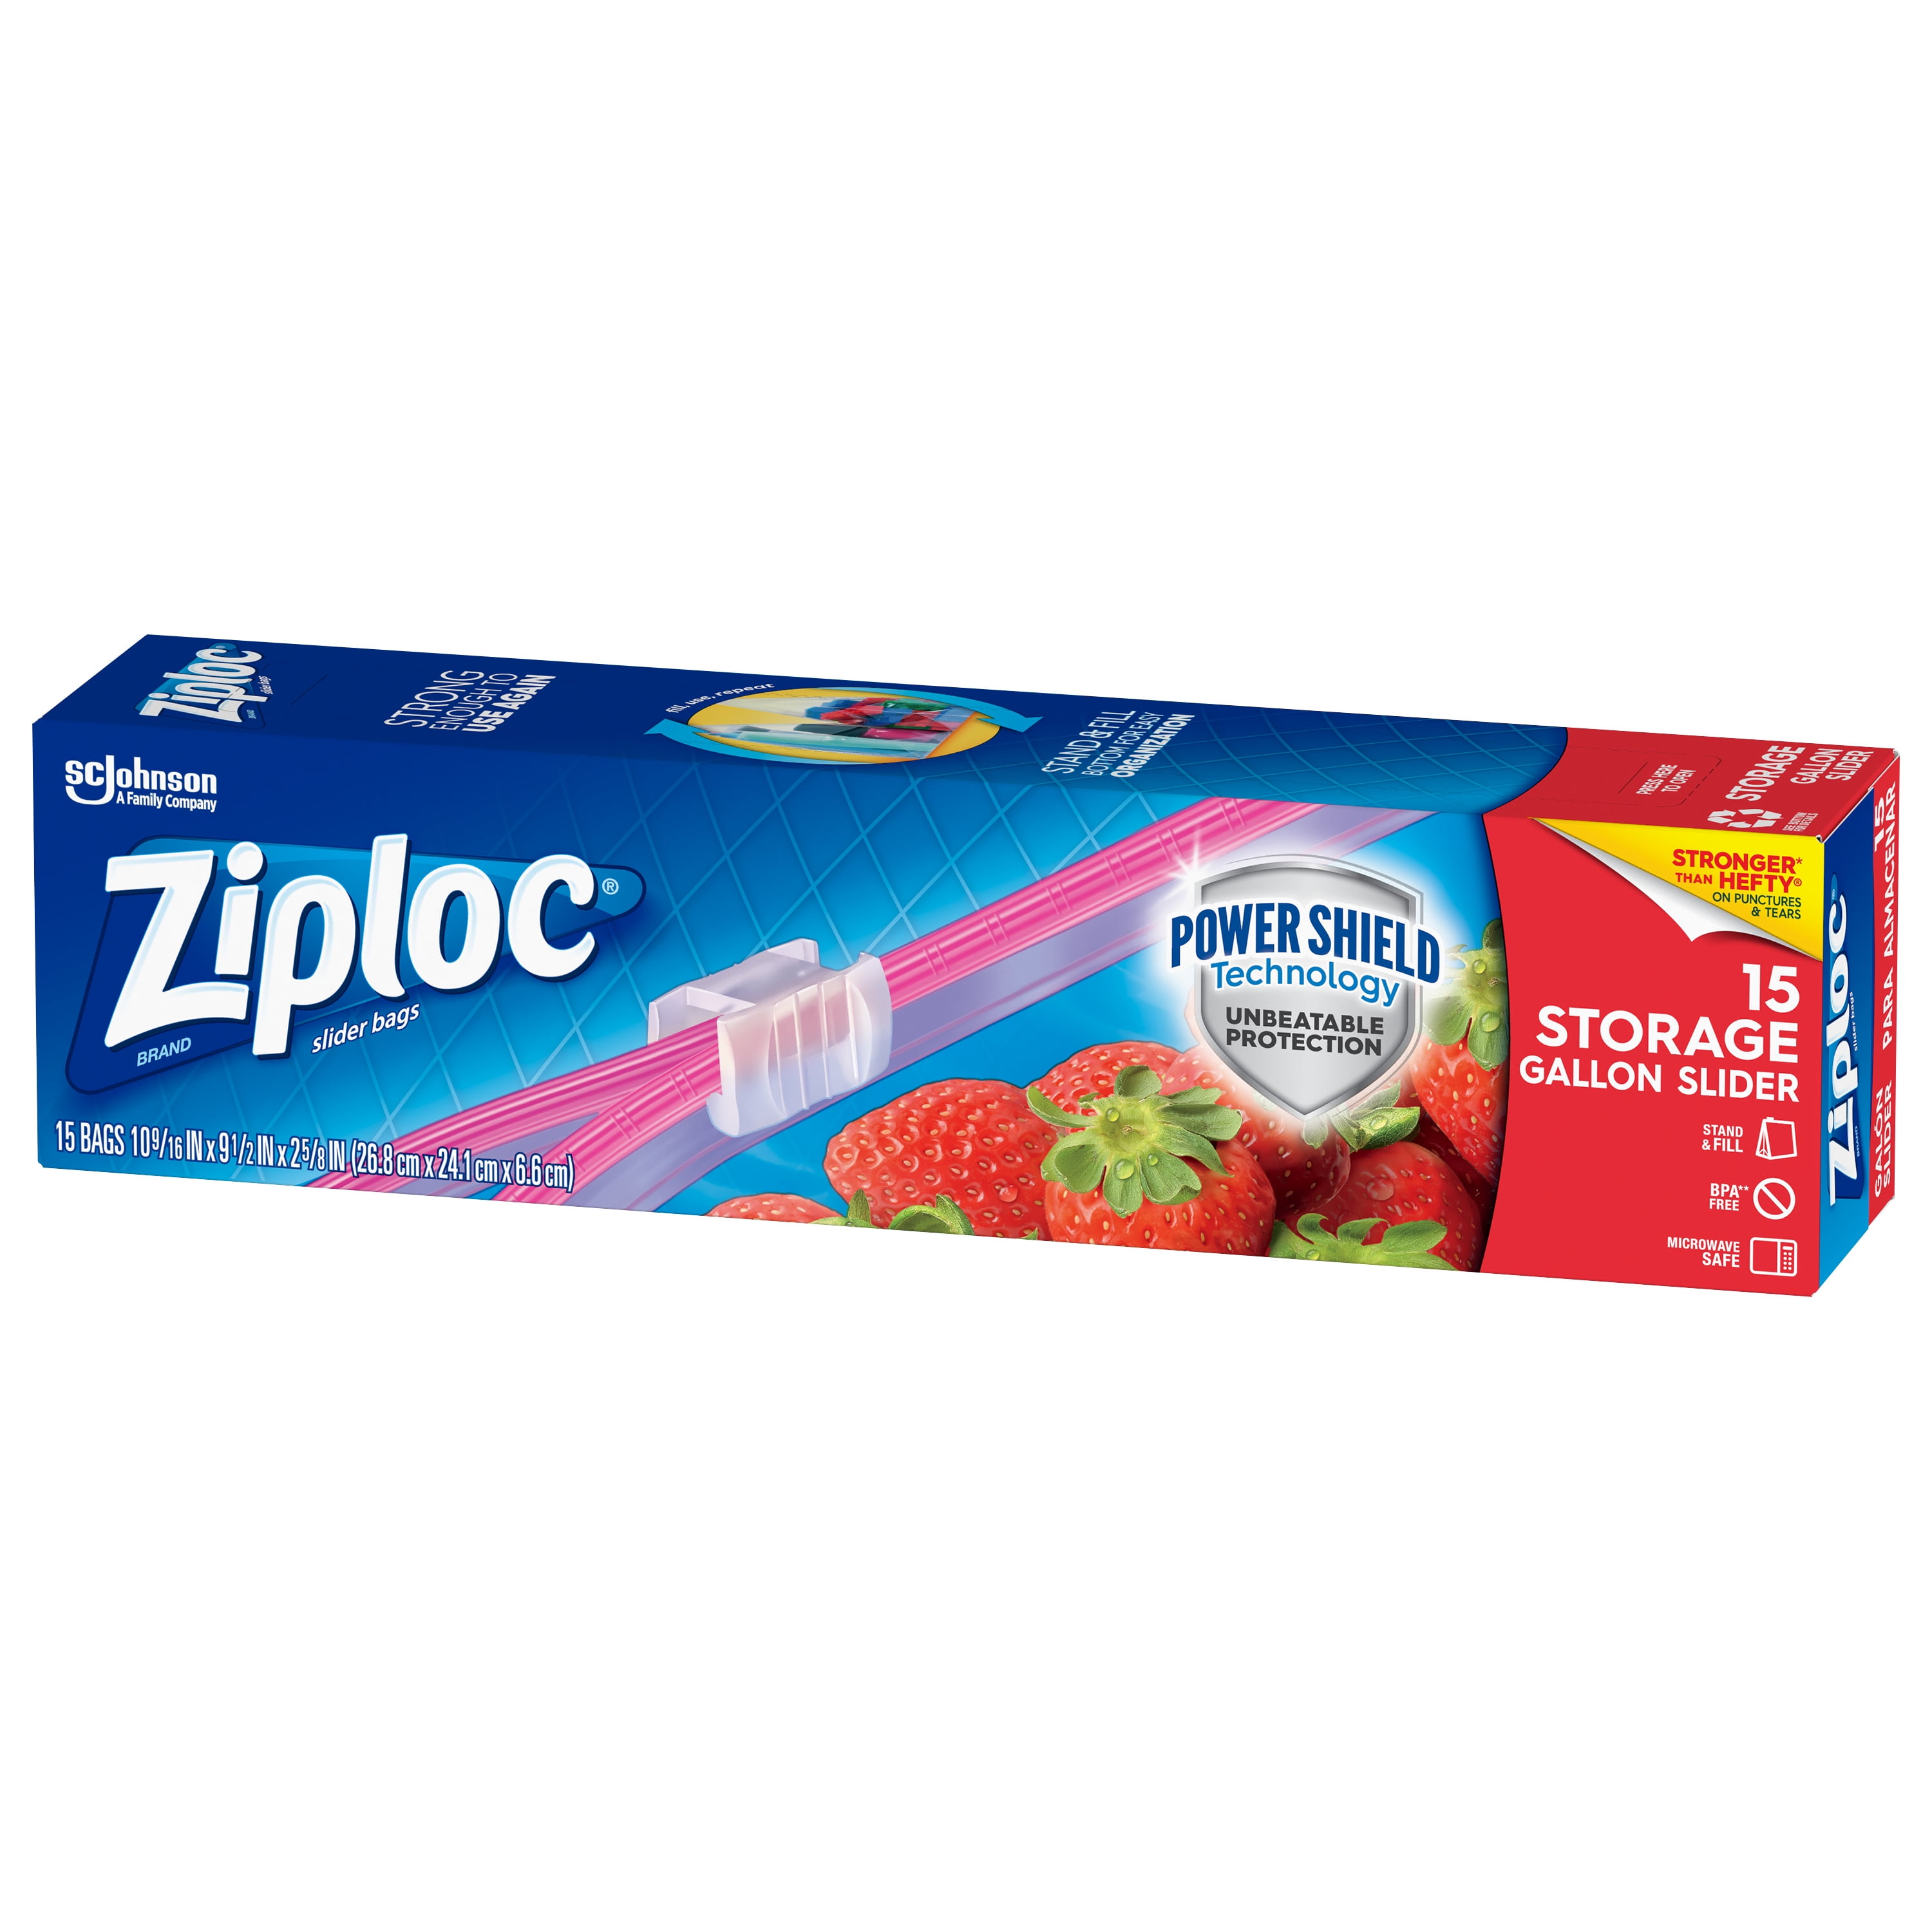 Ziploc® Brand Slider Storage Bags with Power Shield Technology, Quart, 76  Count, Household